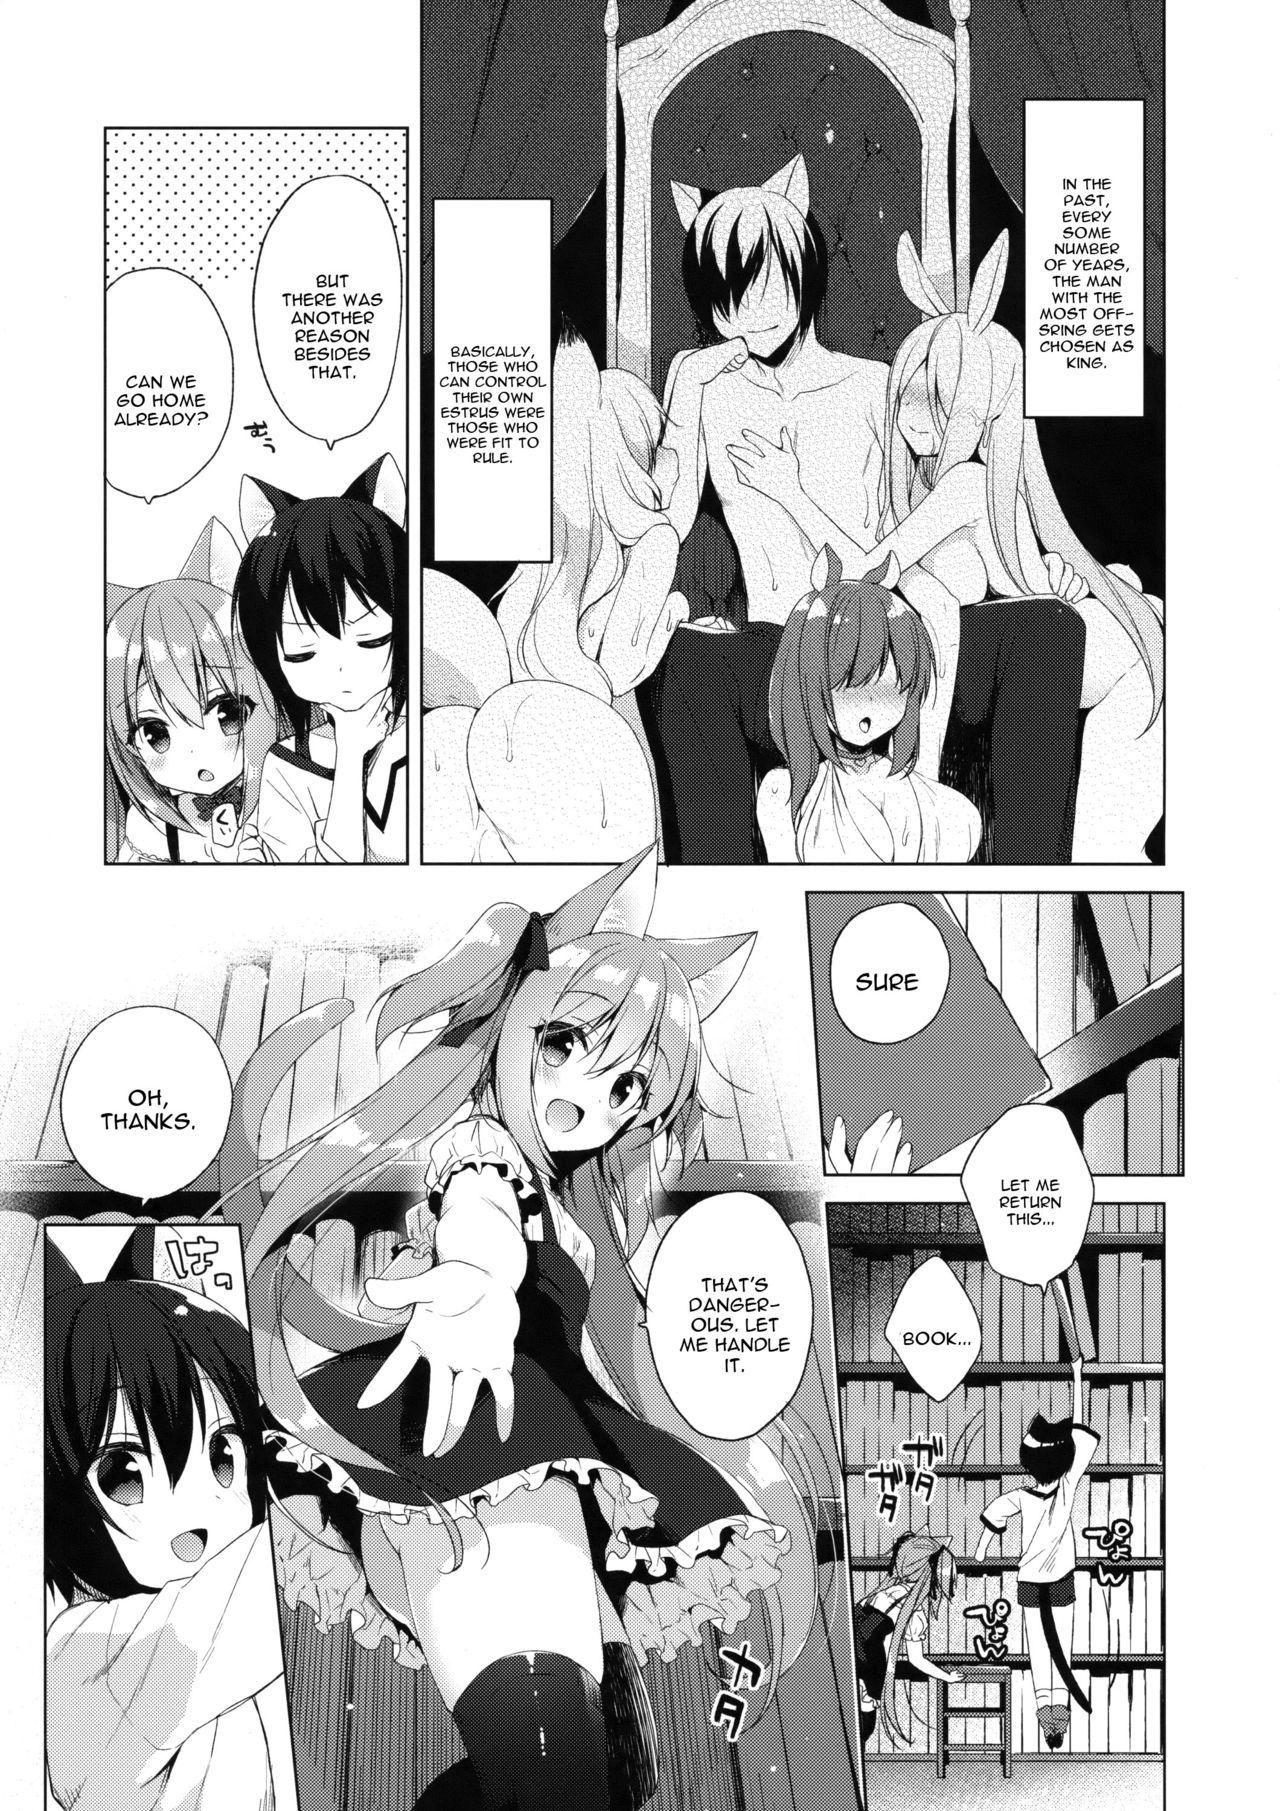 Pigtails Boku no Risou no Isekai Seikatsu 2 - My Ideal Life In A Different World 2 - Original Student - Page 7